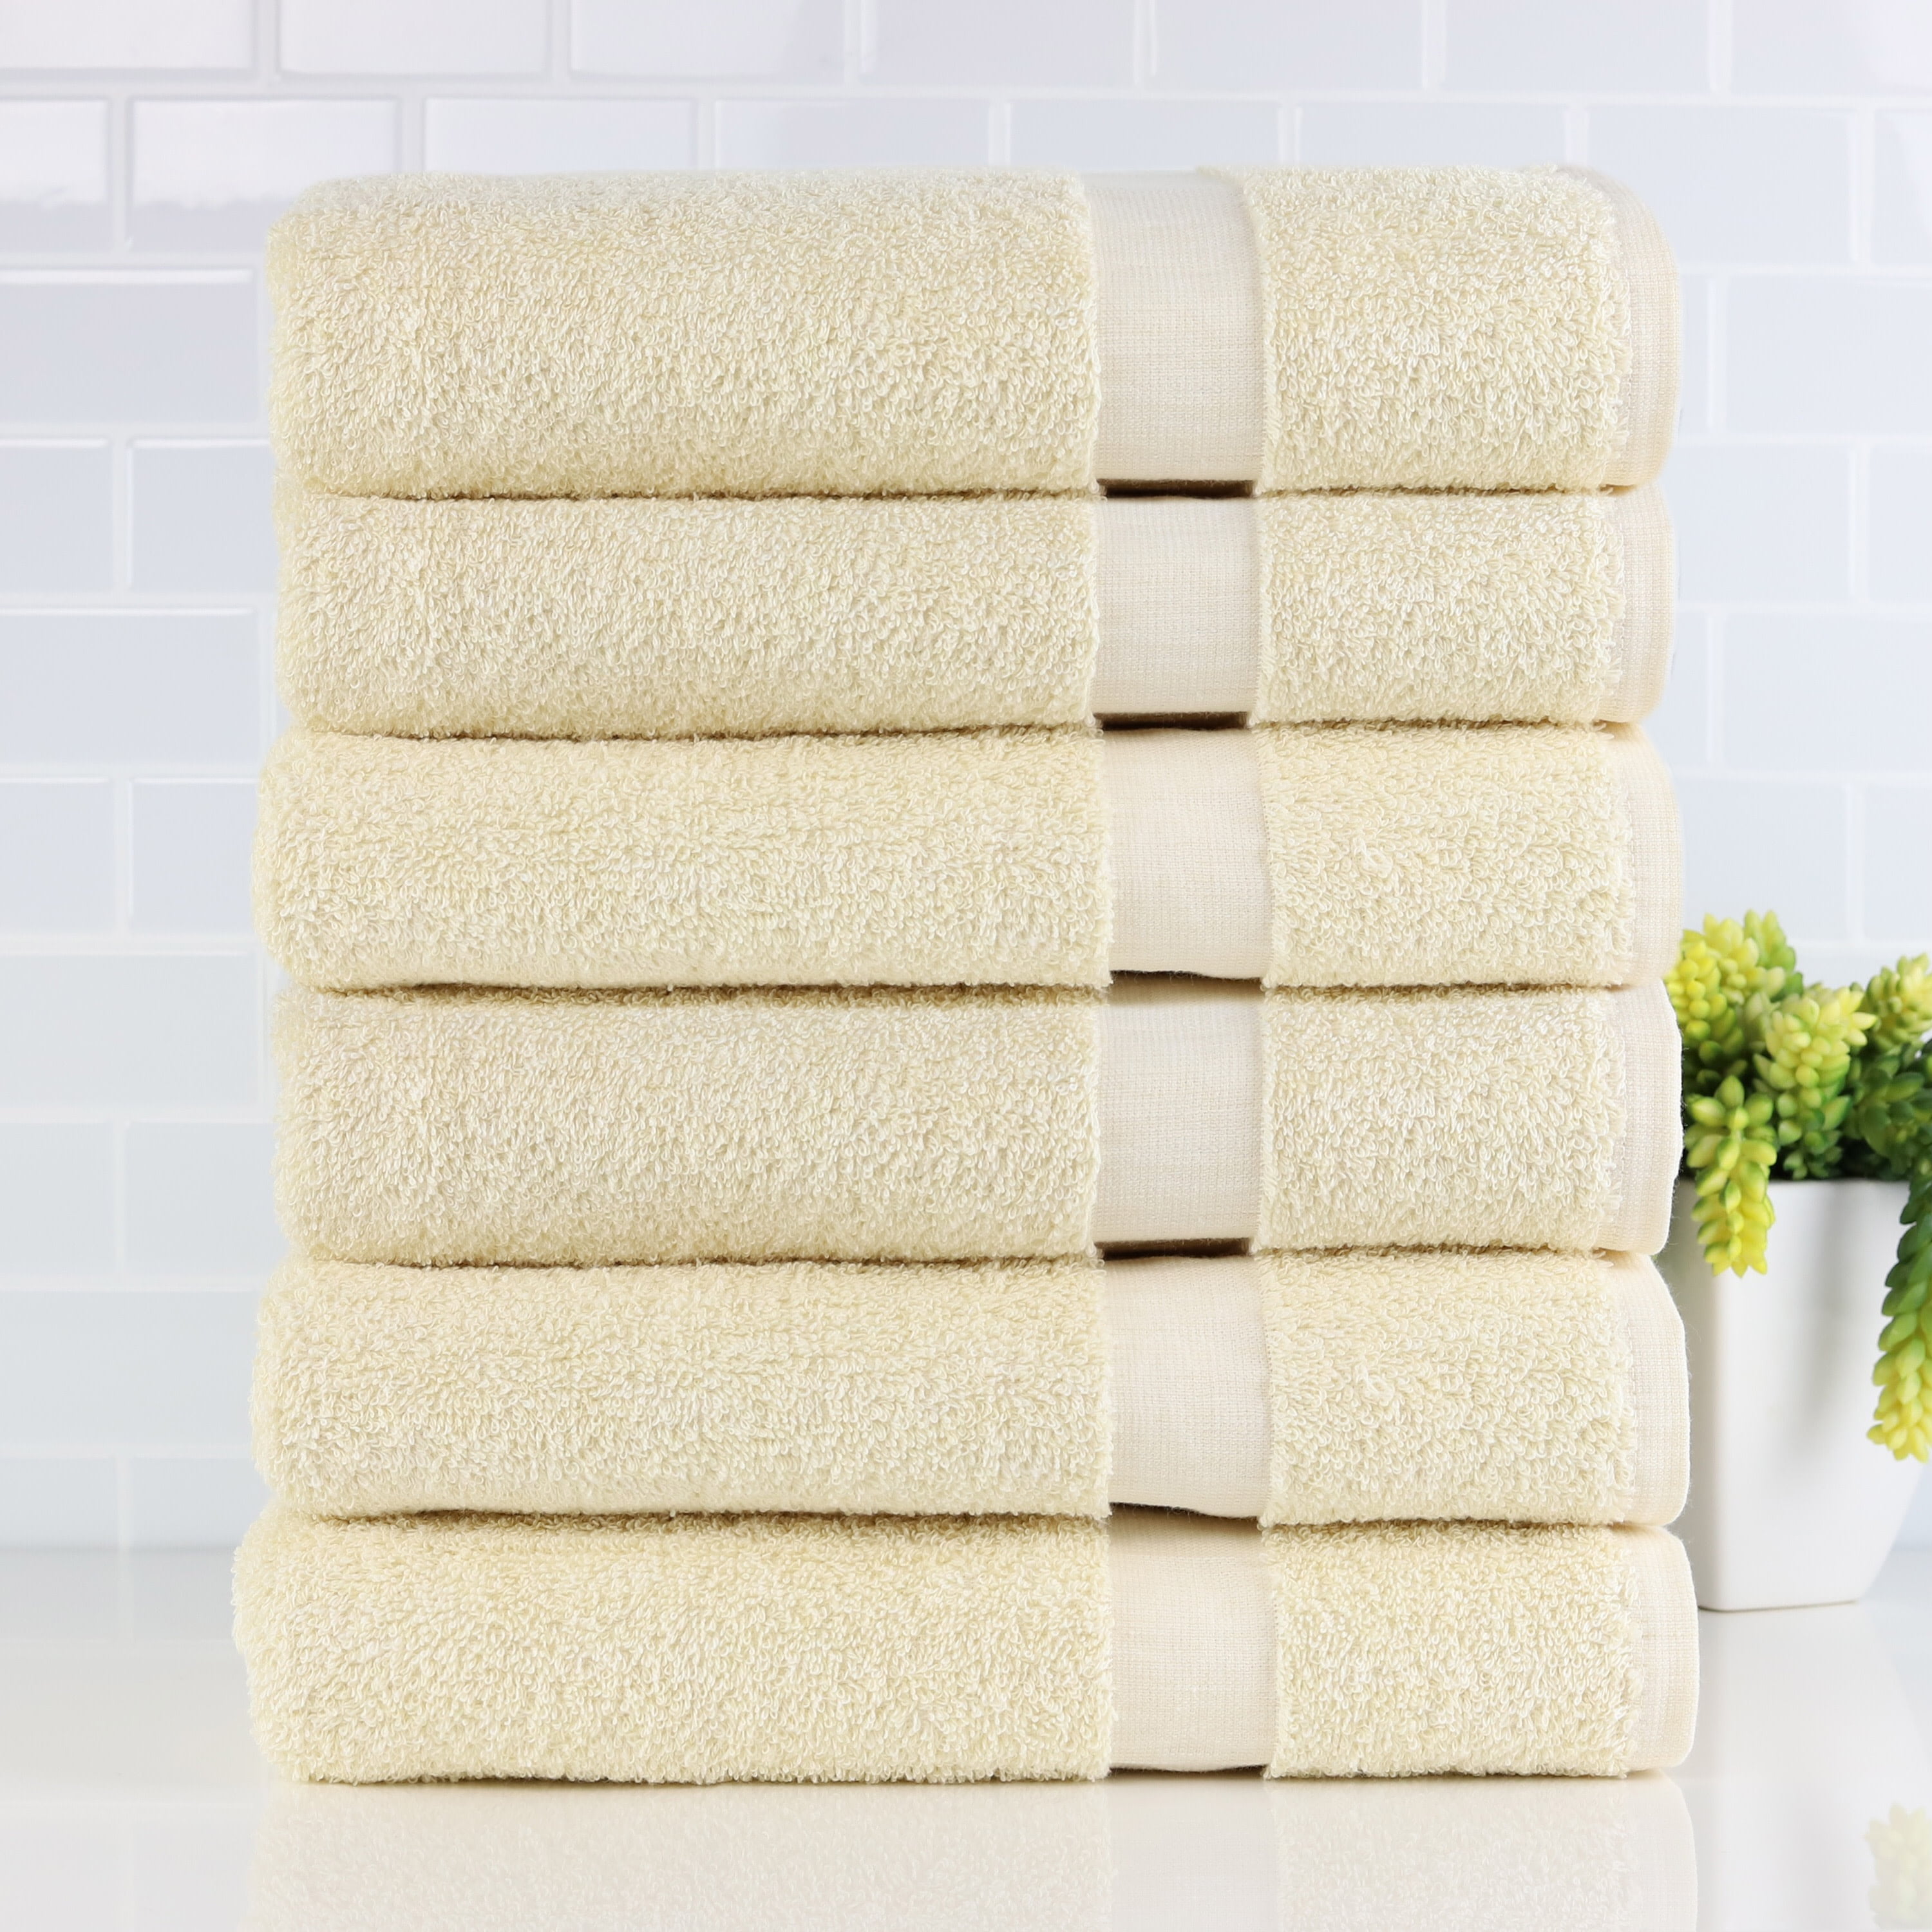 100% Cotton 6-Piece Towel Set - Absorbent and Fade Resistant Bath Towels Set (Brown), Size: 2 Bath Towels 50 x 26, 2 Hand Towels 26 x 16, and 2